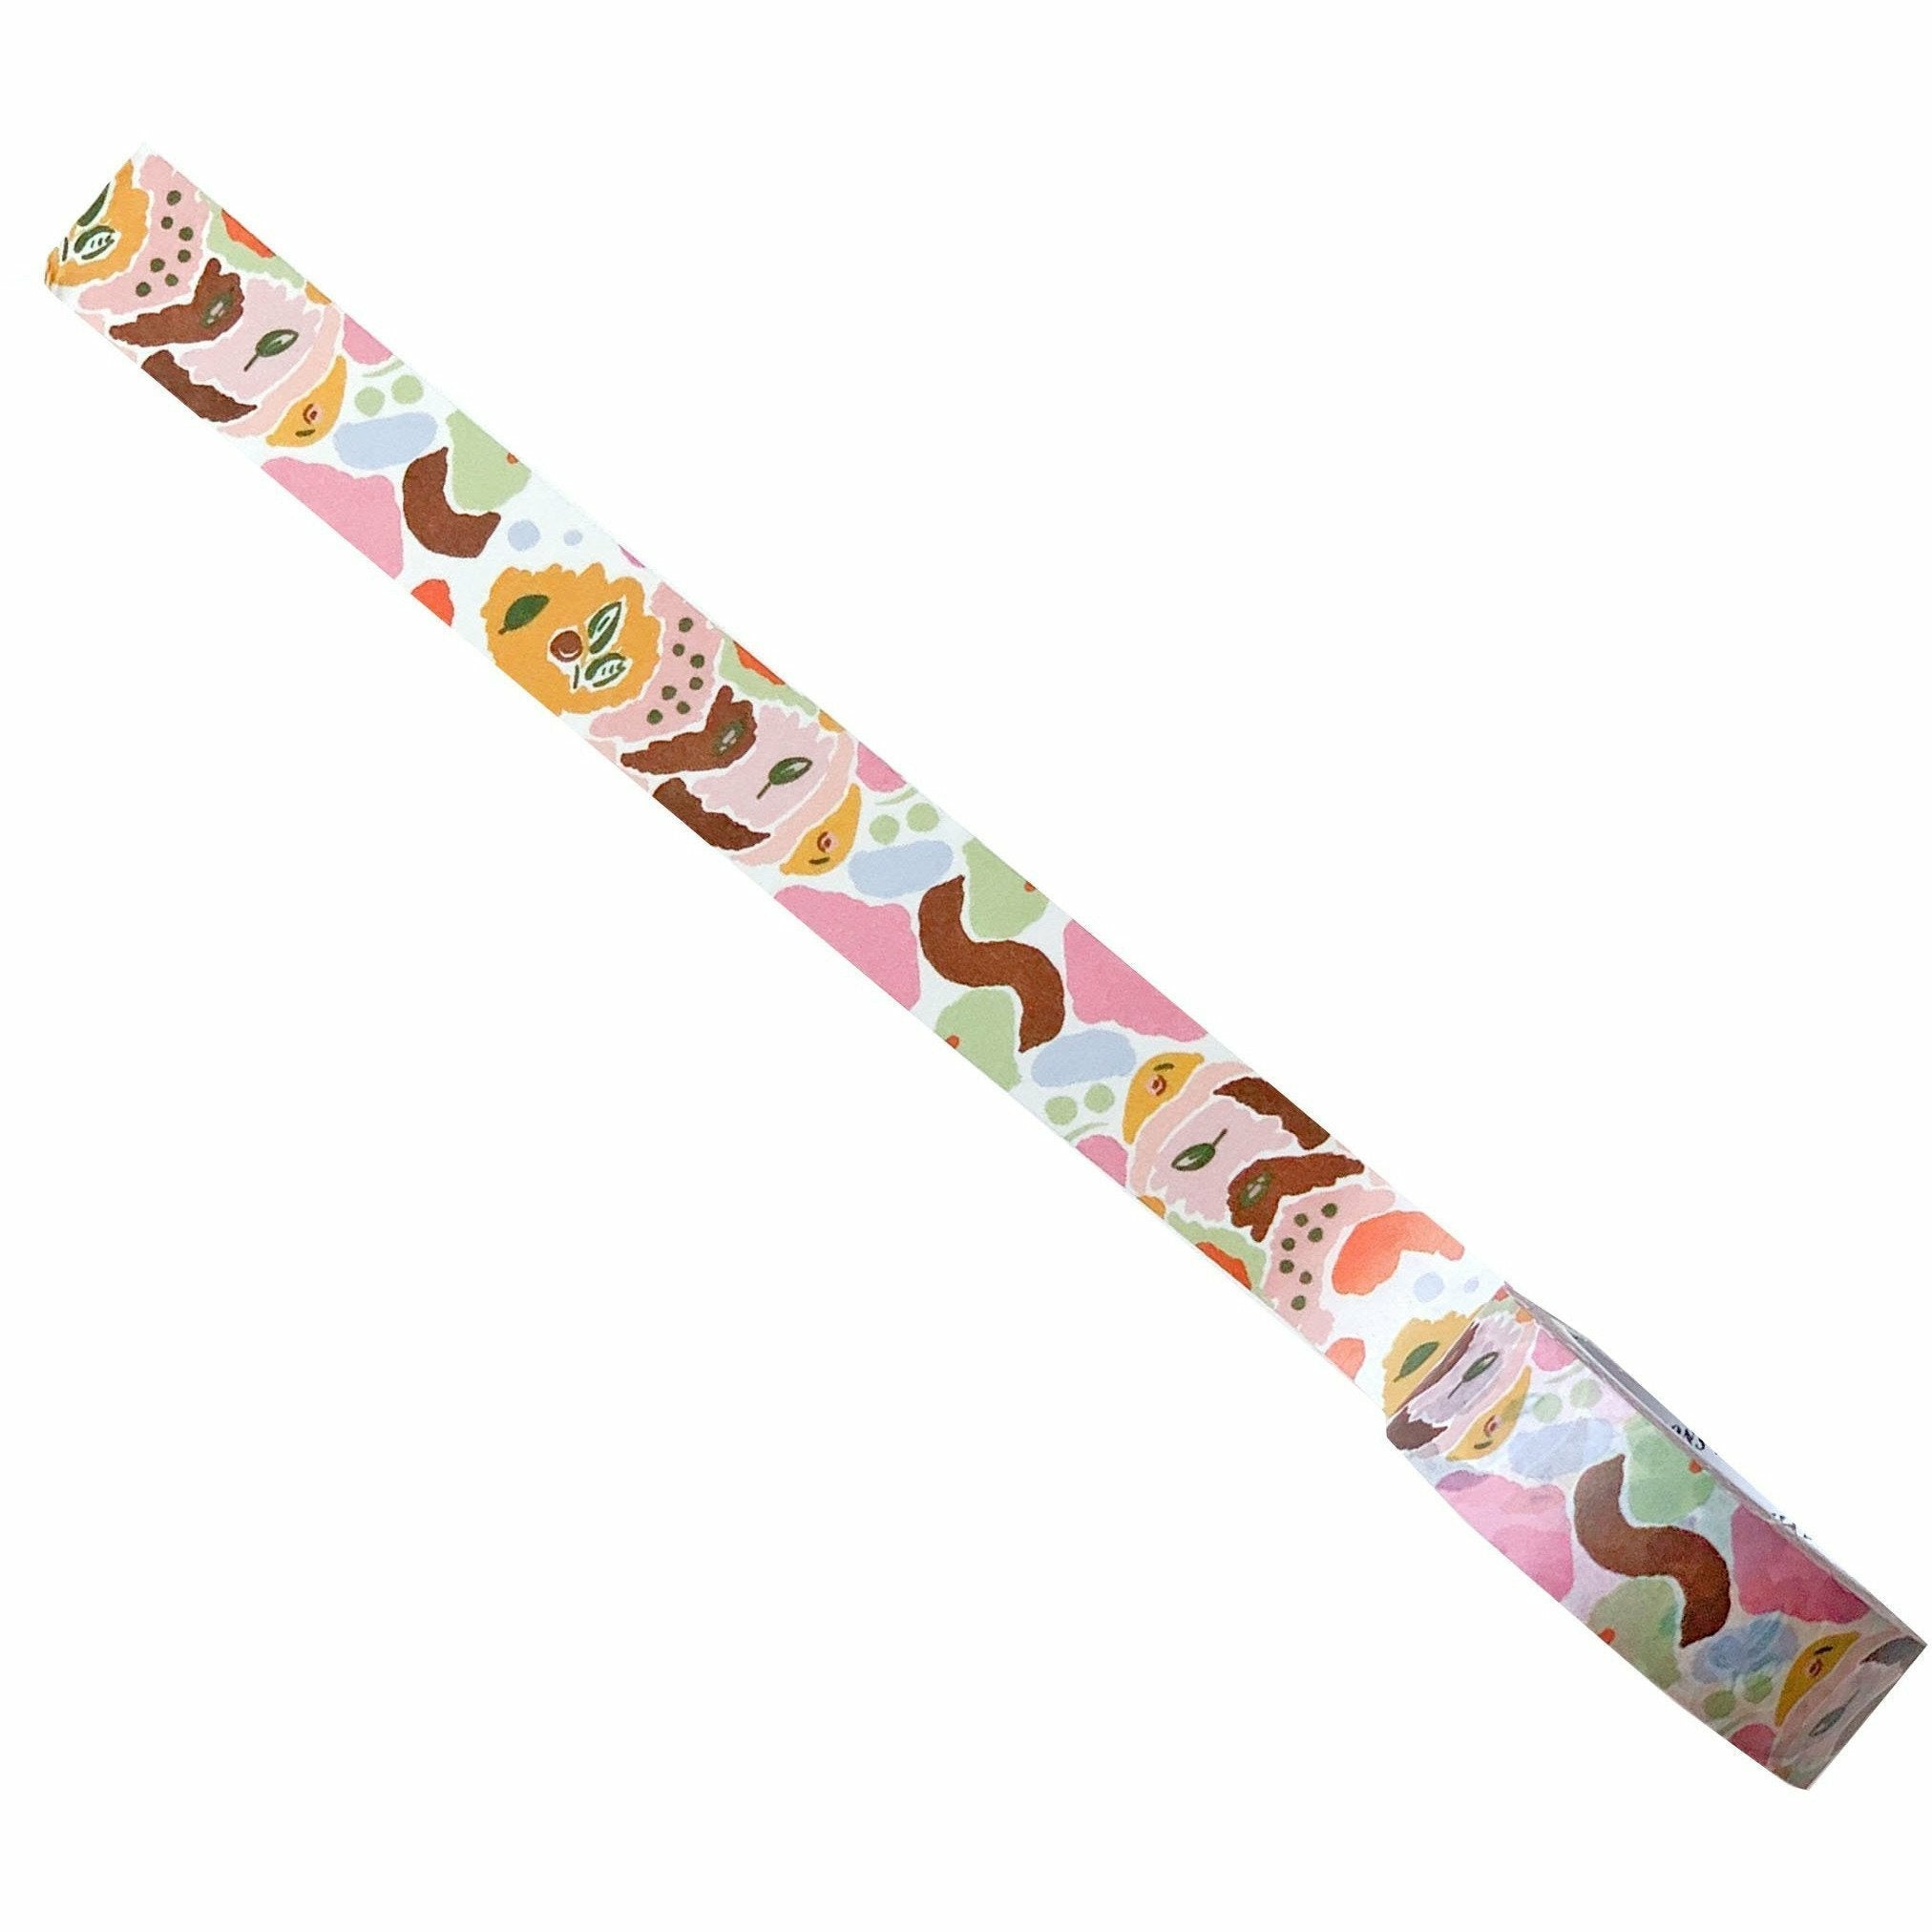 Decorative Washi Tape Featuring Colorful Modern Abstract Brushwork - The First Snow